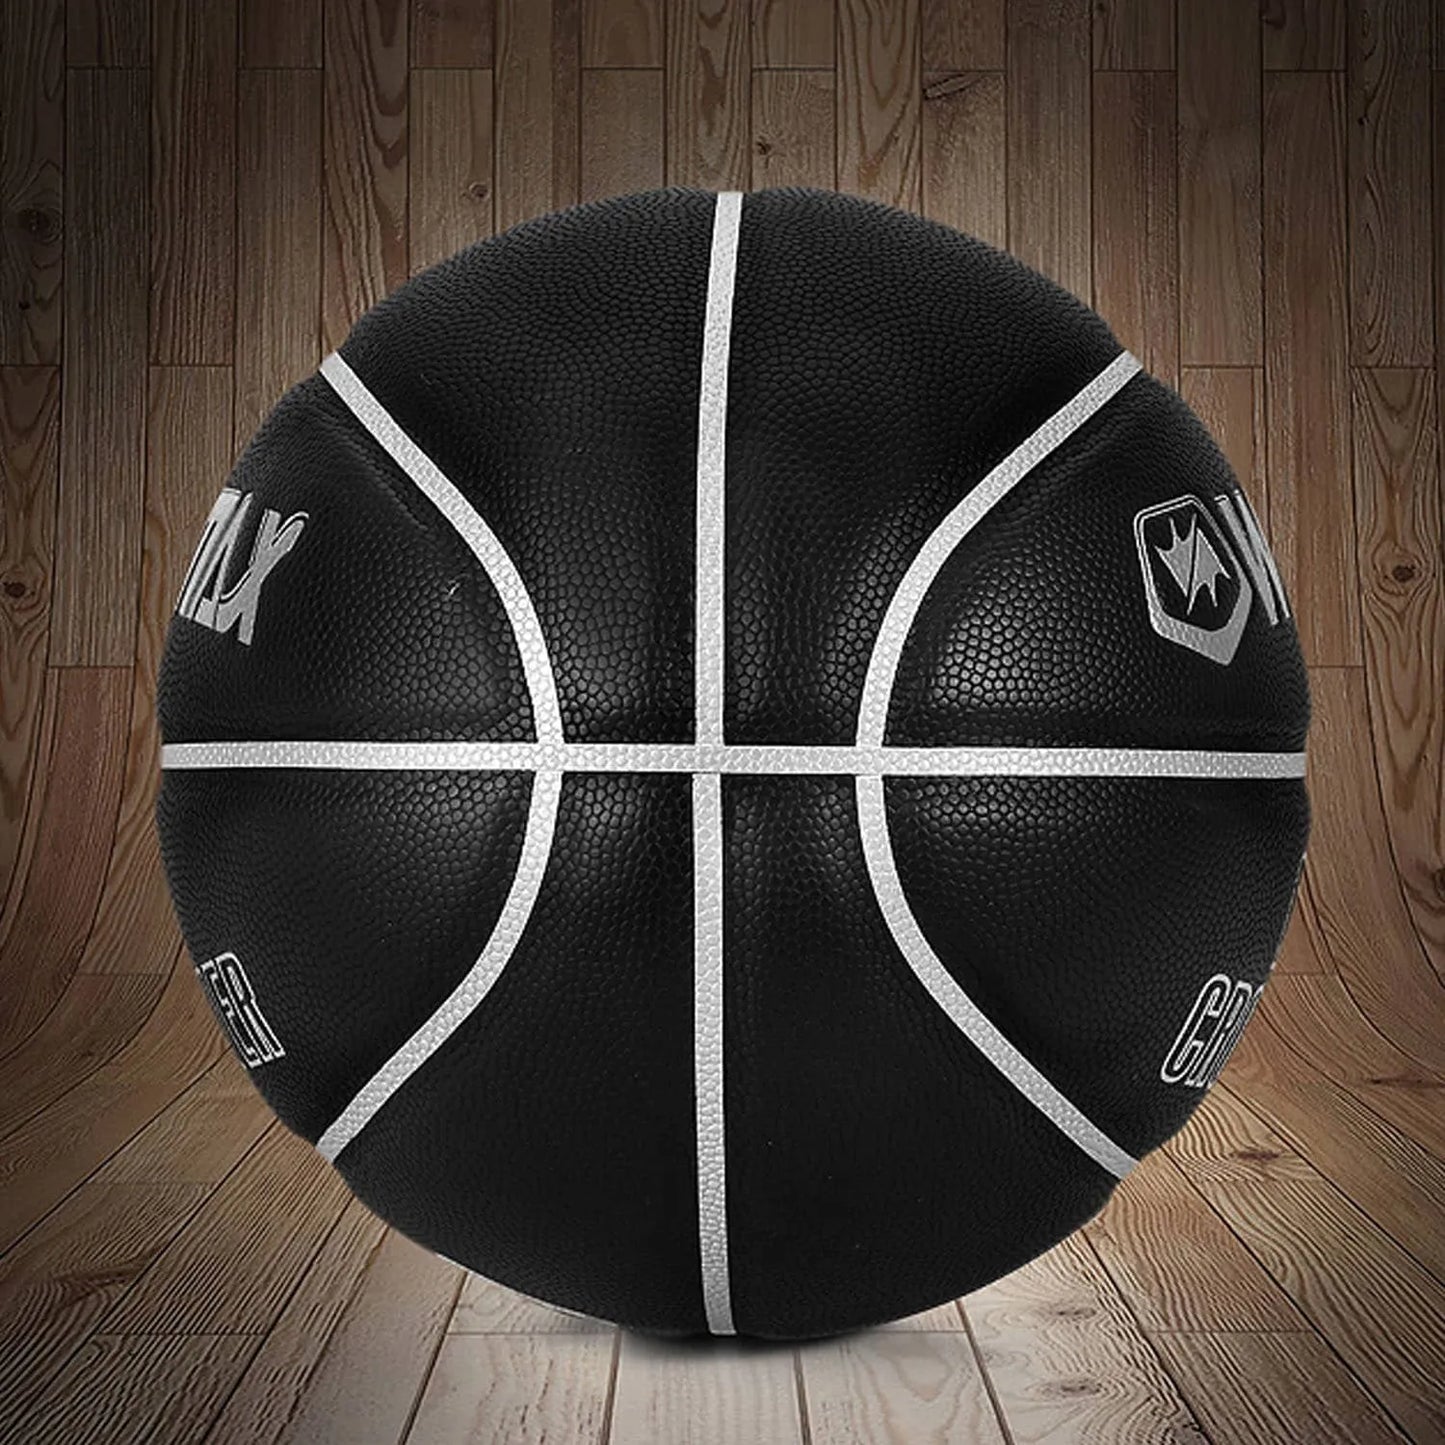 Winmax Basketball Black with Silver Design Lower Side View